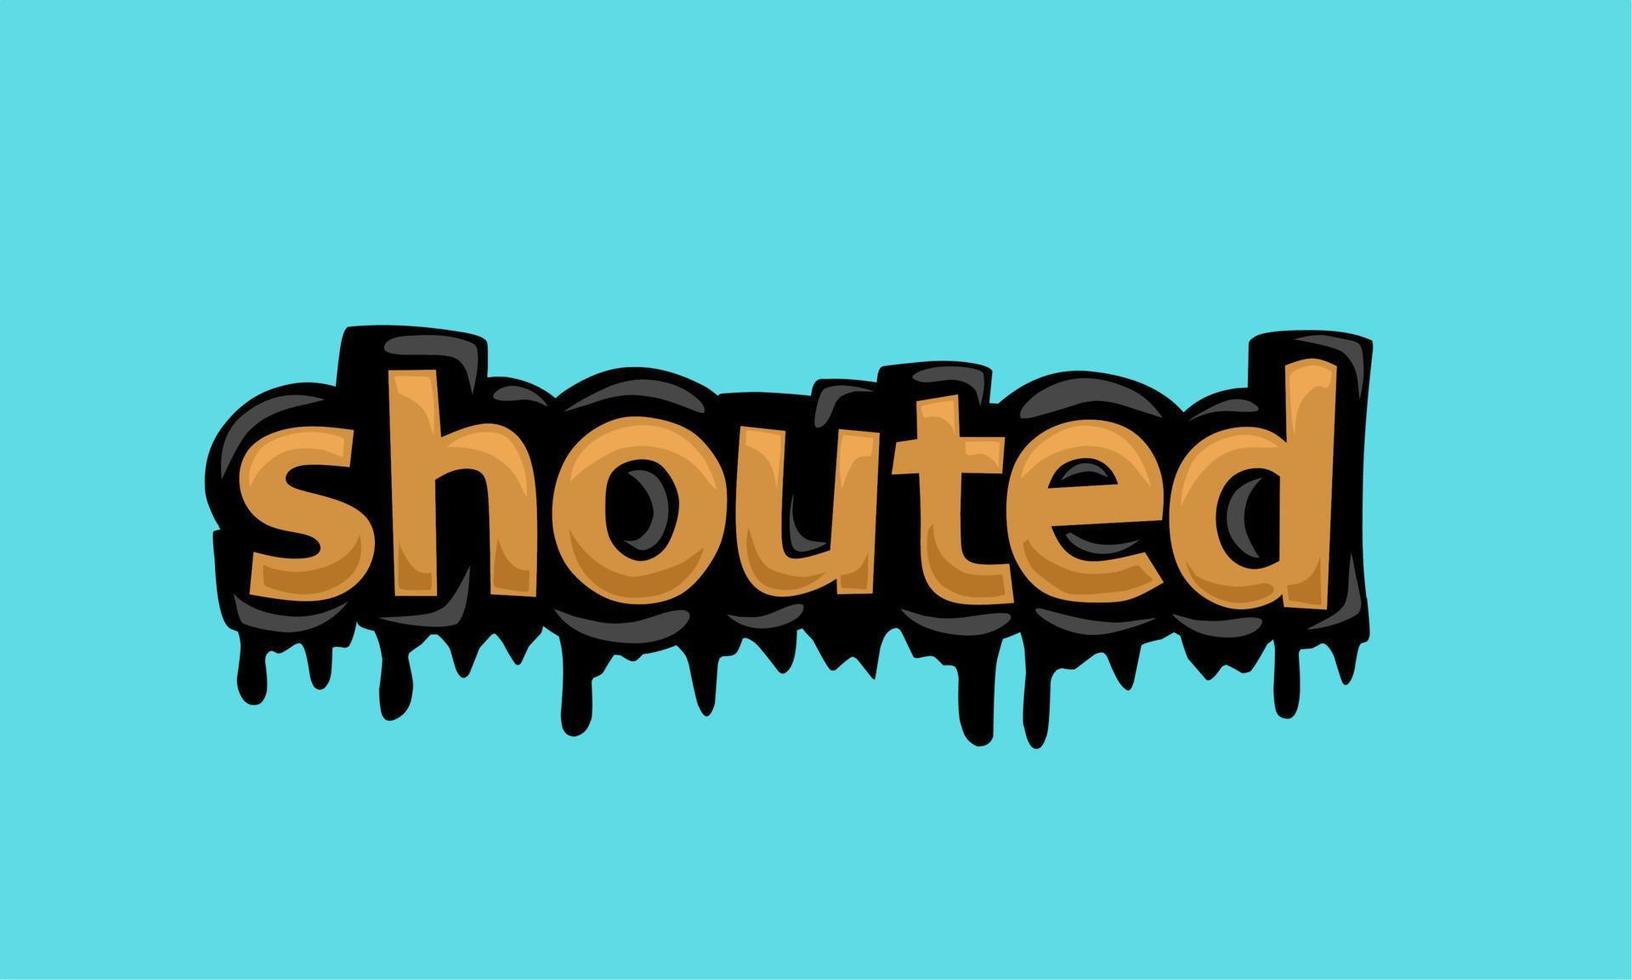 SHOUTED writing vector design on blue background